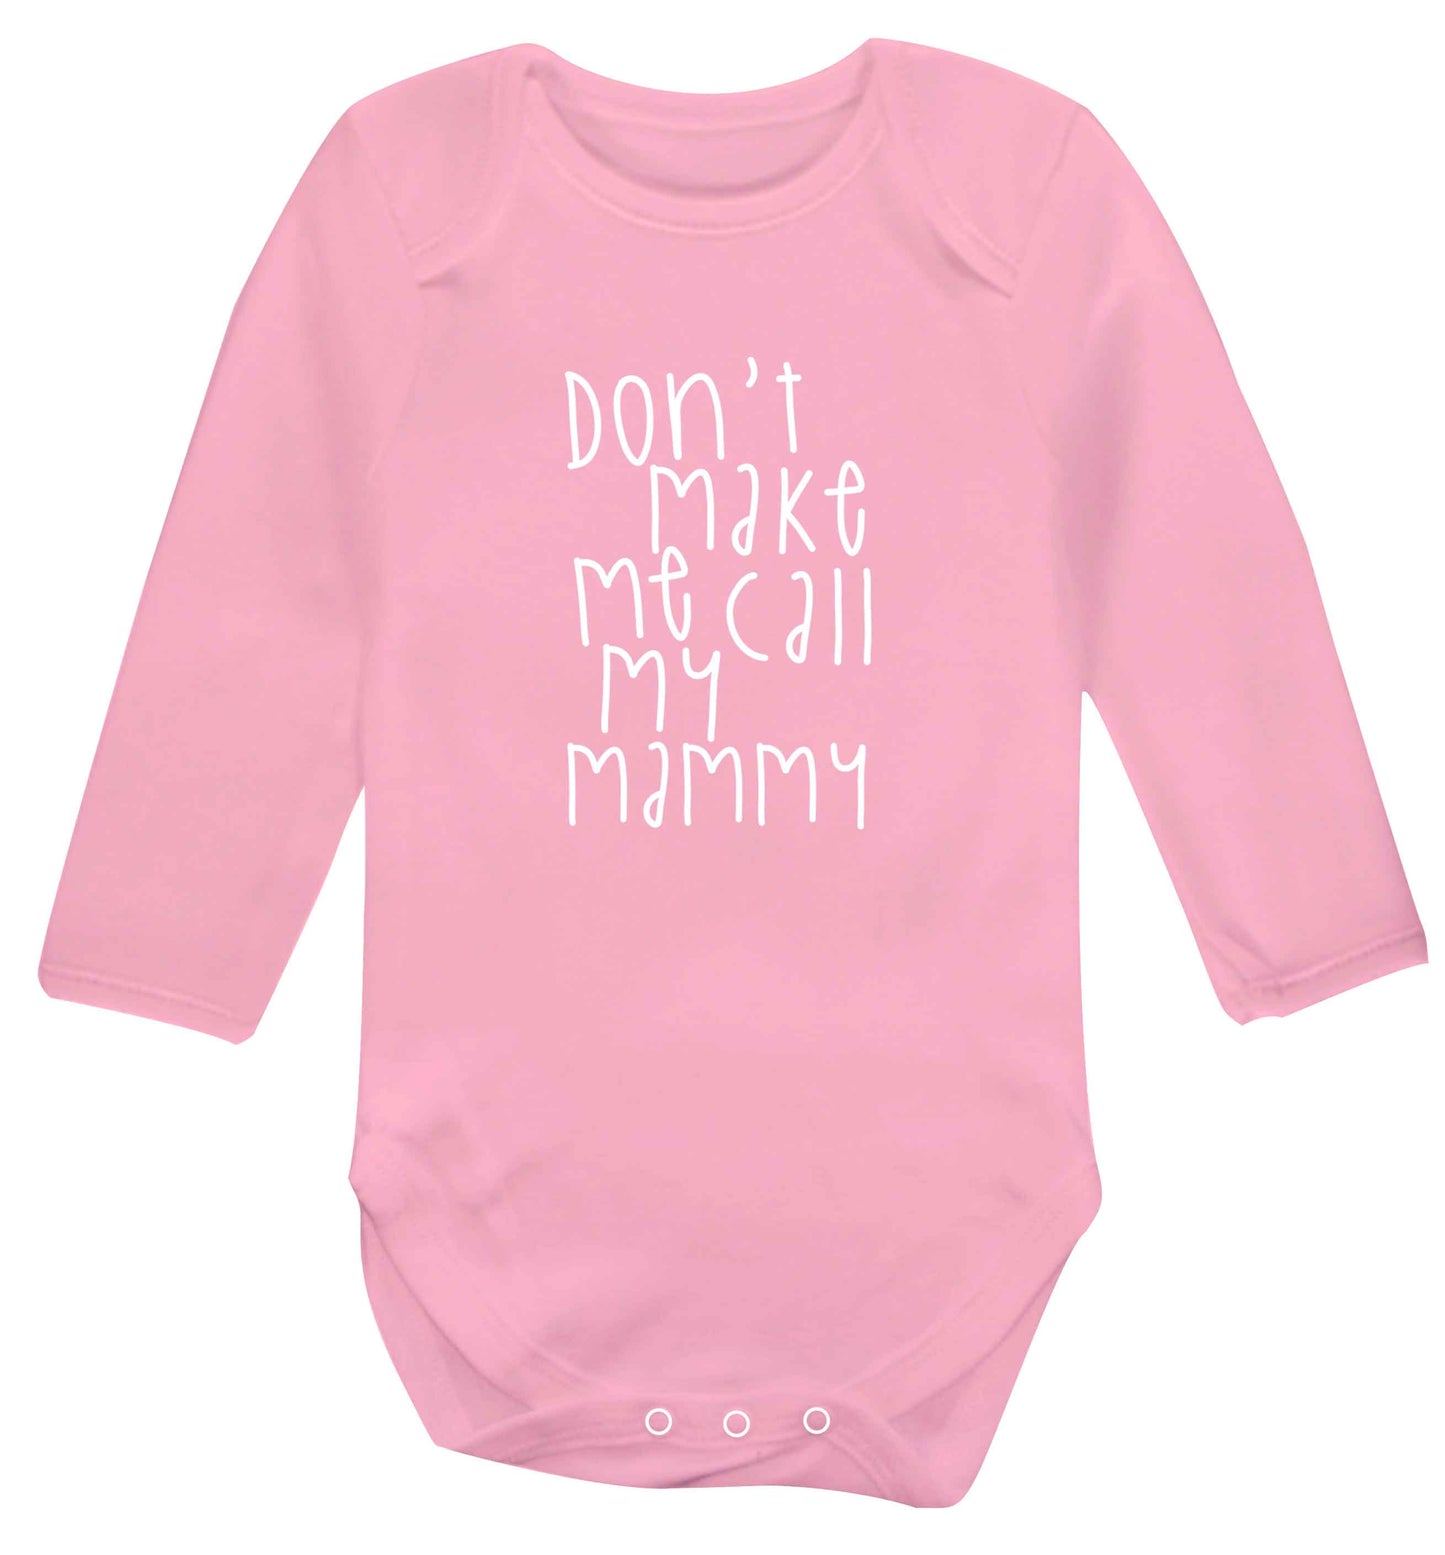 Don't make me call my mammy baby vest long sleeved pale pink 6-12 months